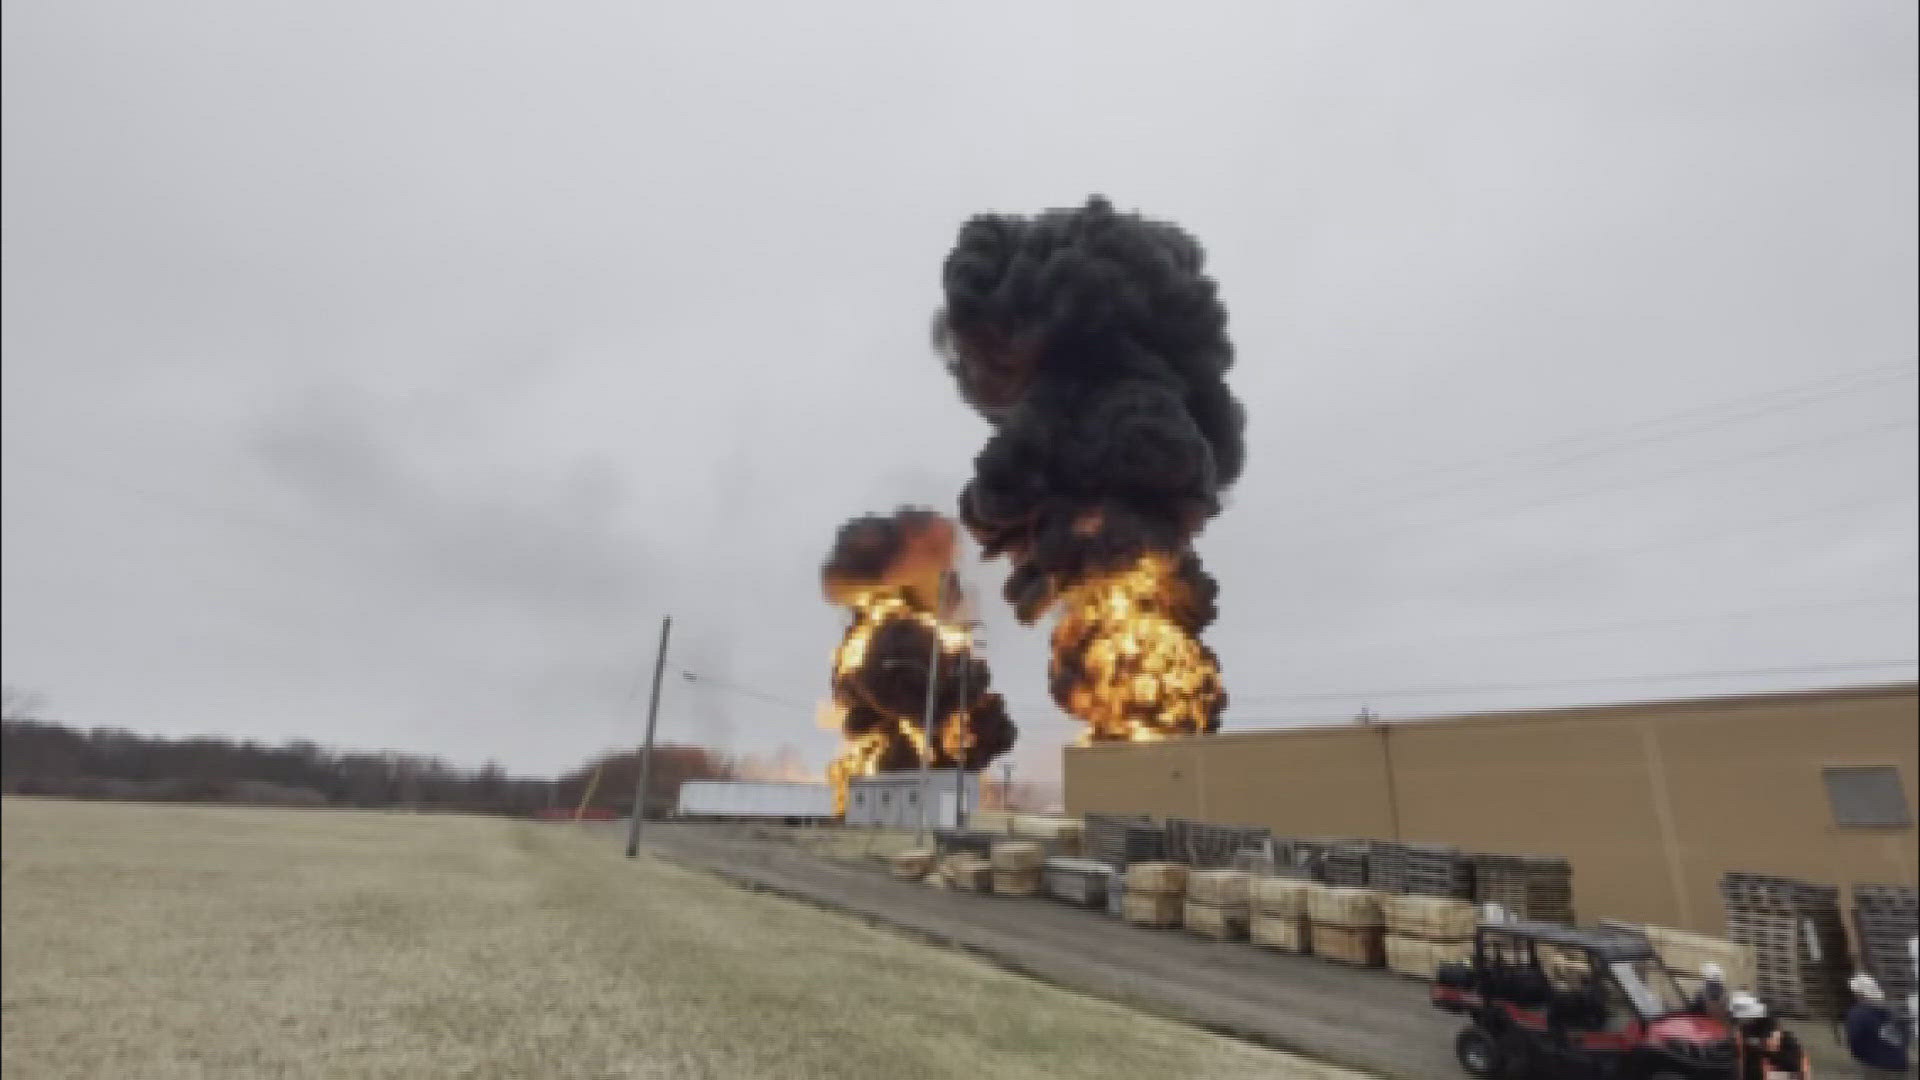 The National Transportation Safety Board (NTSB) will hold a hearing Tuesday to discuss what caused the Feb. 2023 train derailment in East Palestine, Ohio.